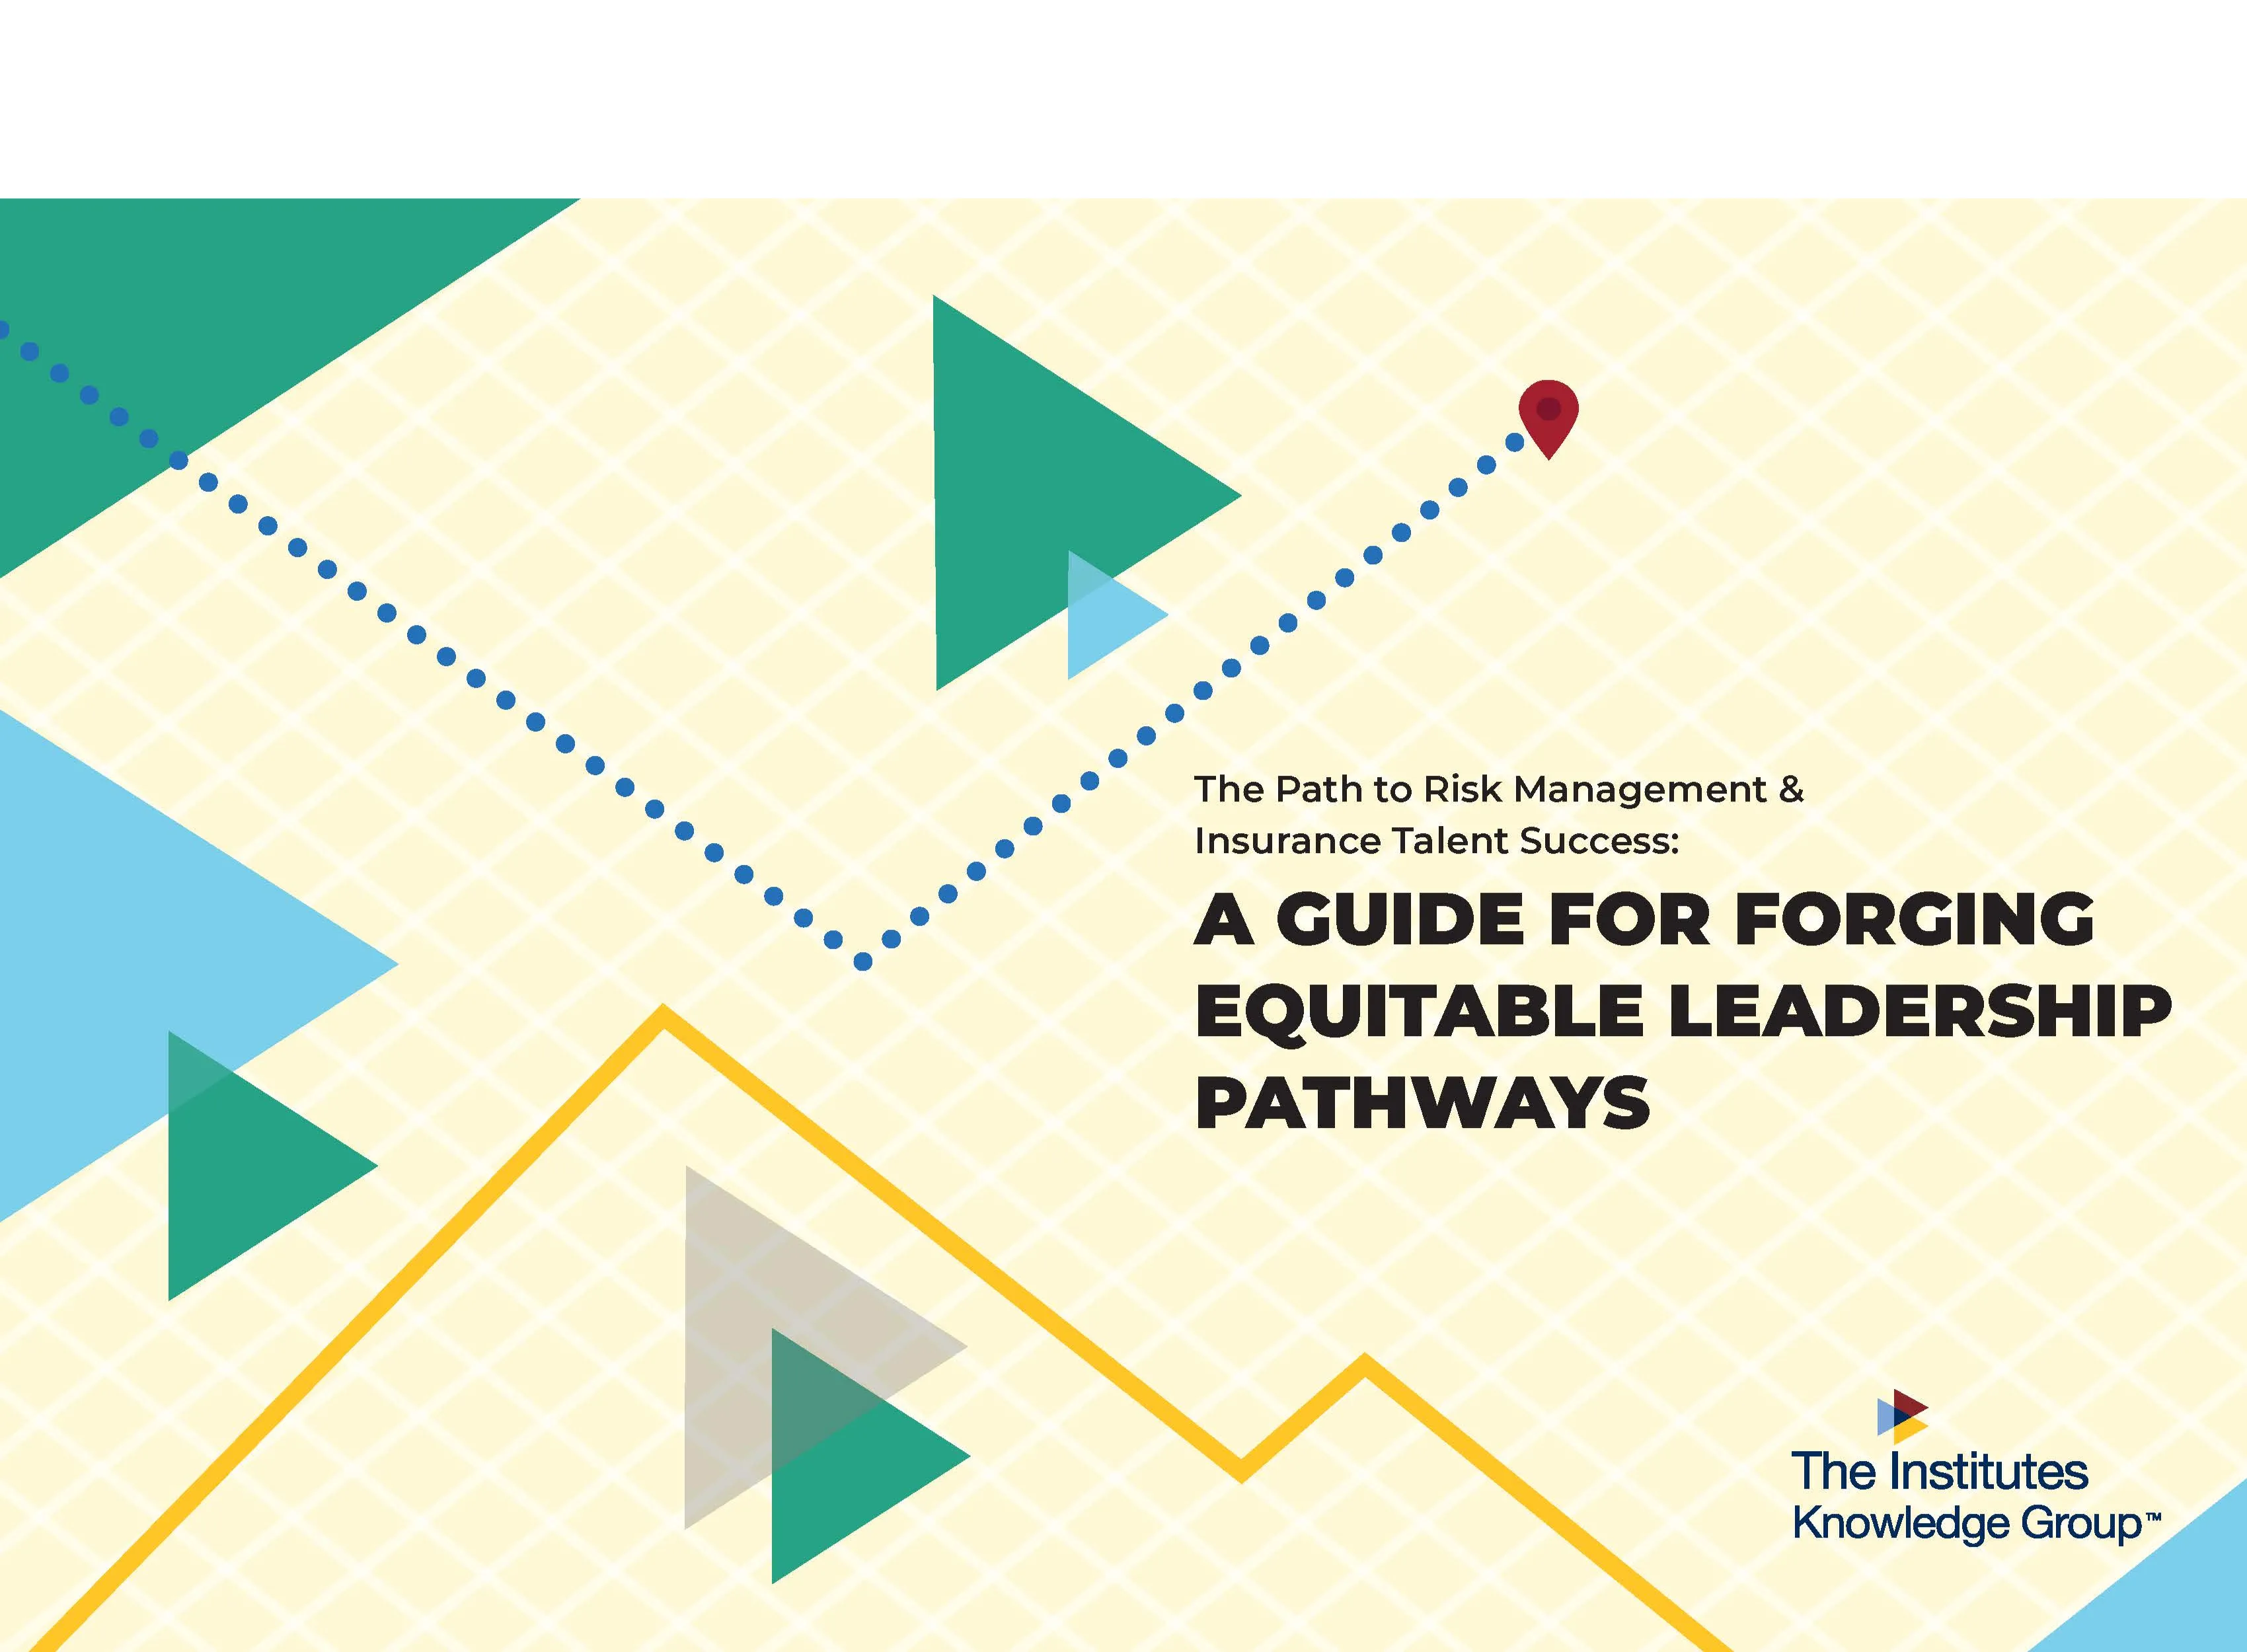 Image of yellow cover with pathway imagery and the title "A Guide for Forging Equitable Leadership Pathways Landing Page"